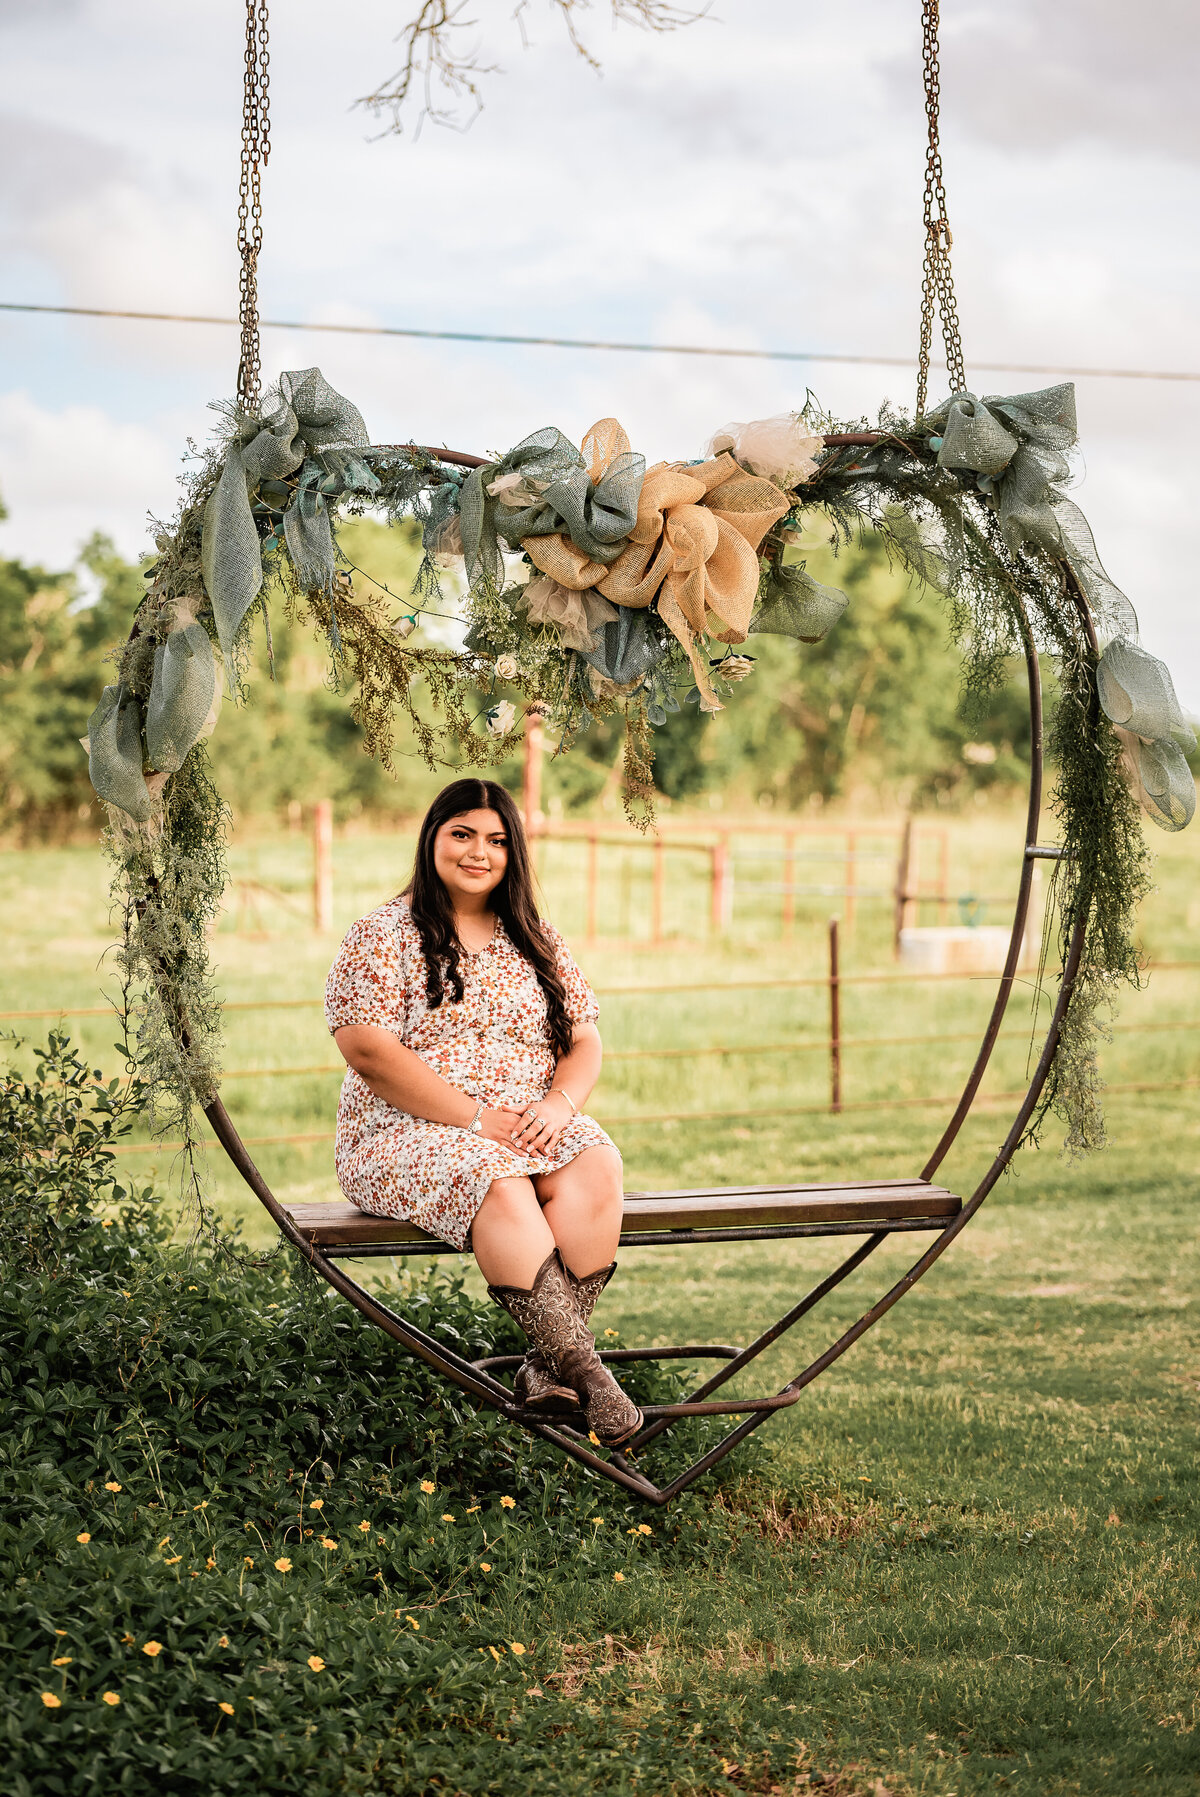 A Galveston county senior sits in a heart shaped metal swing decorated with greenery.